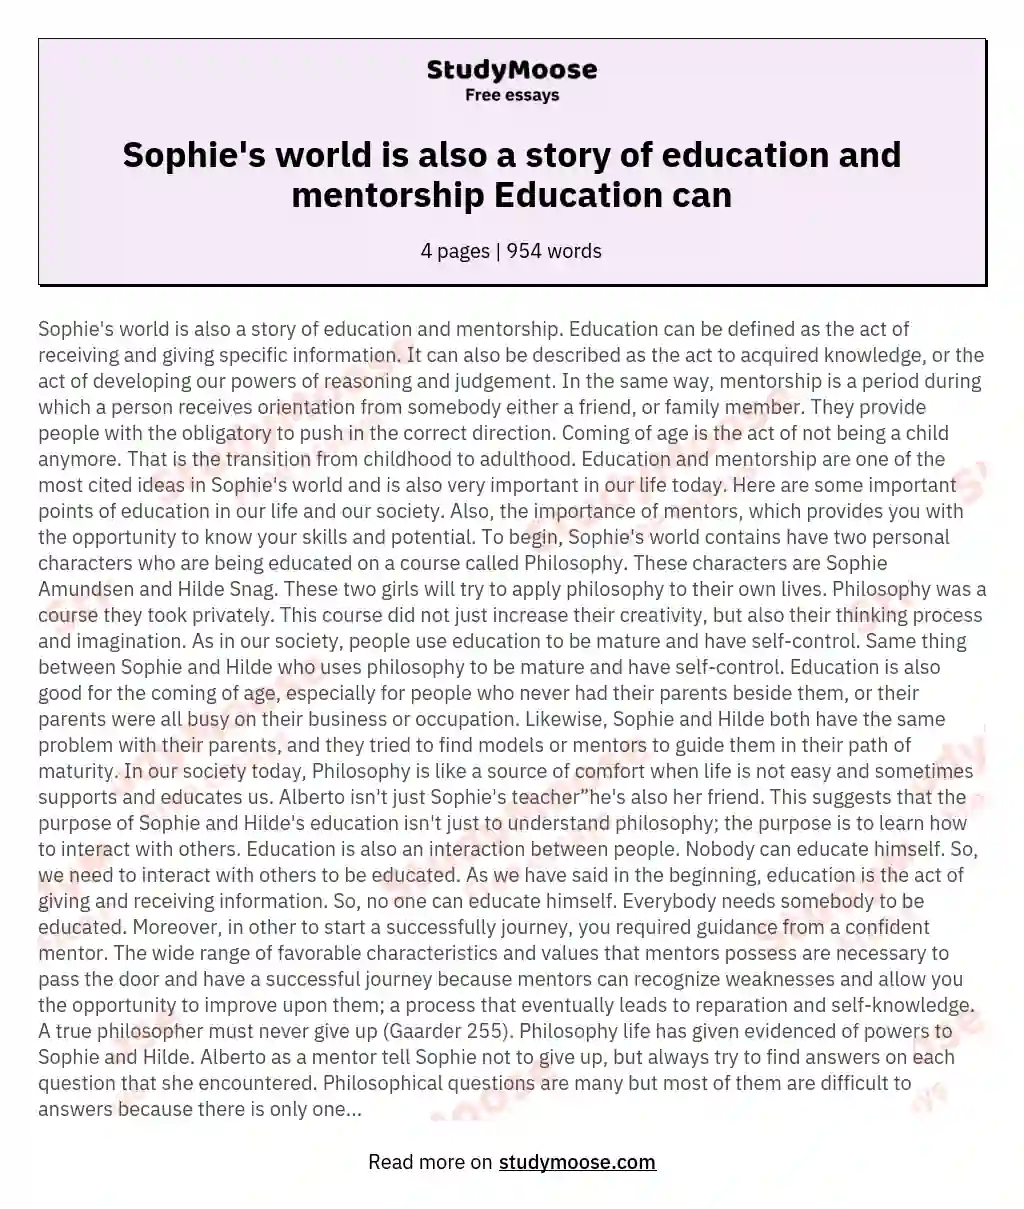 Sophie's world is also a story of education and mentorship Education can